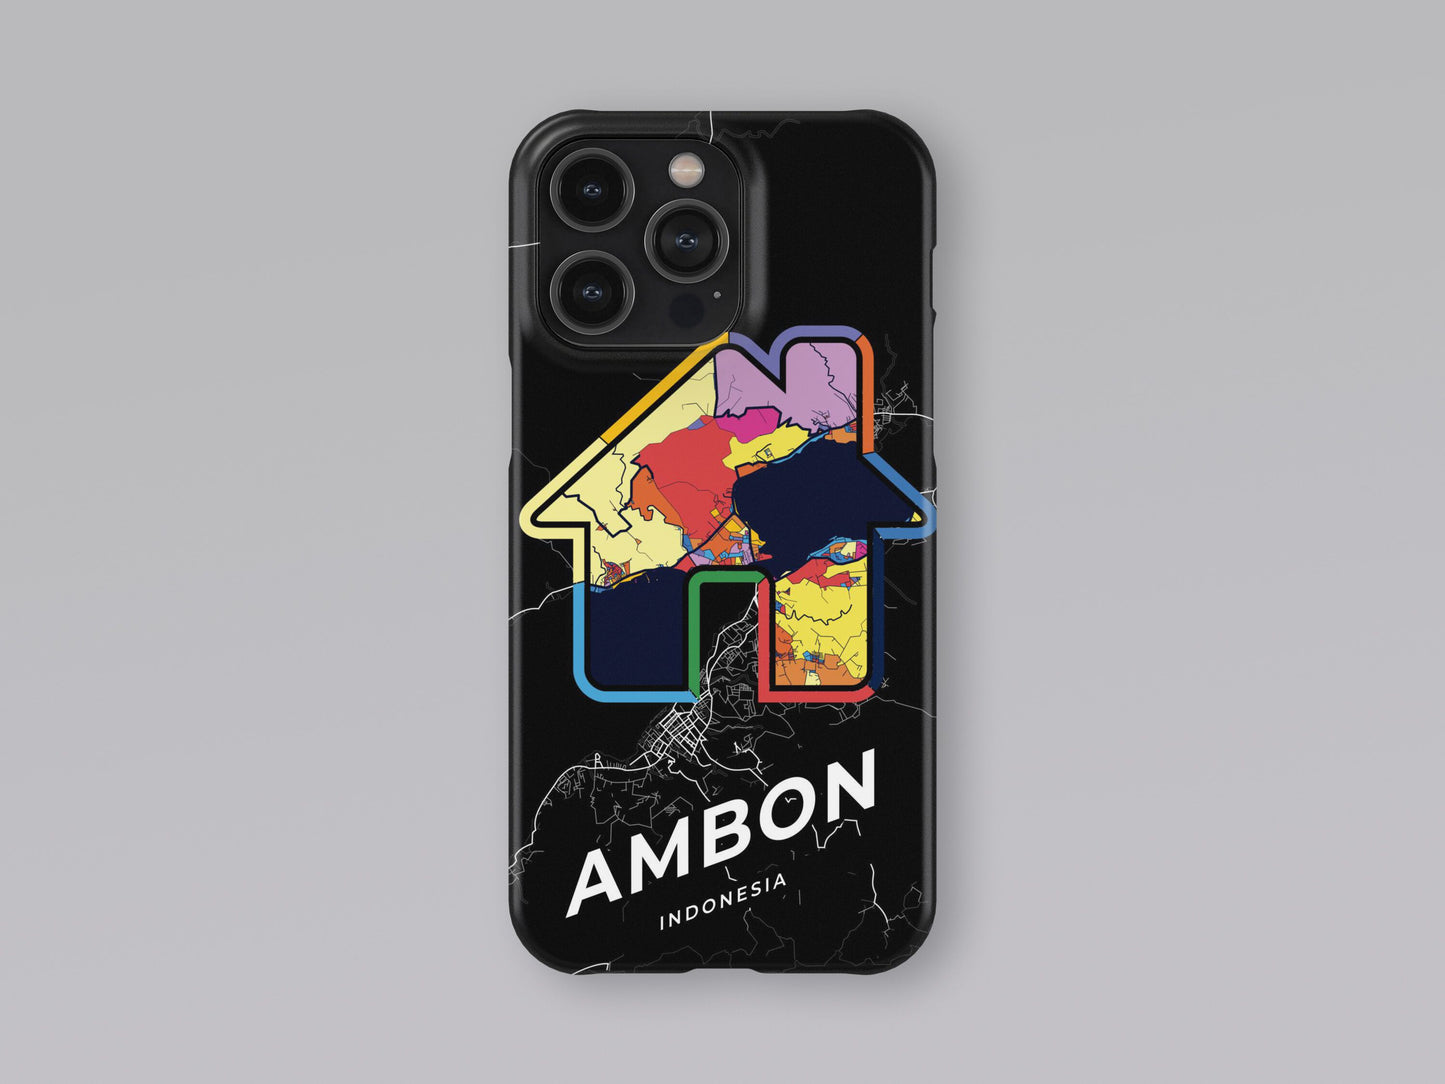 Ambon Indonesia slim phone case with colorful icon. Birthday, wedding or housewarming gift. Couple match cases. 3